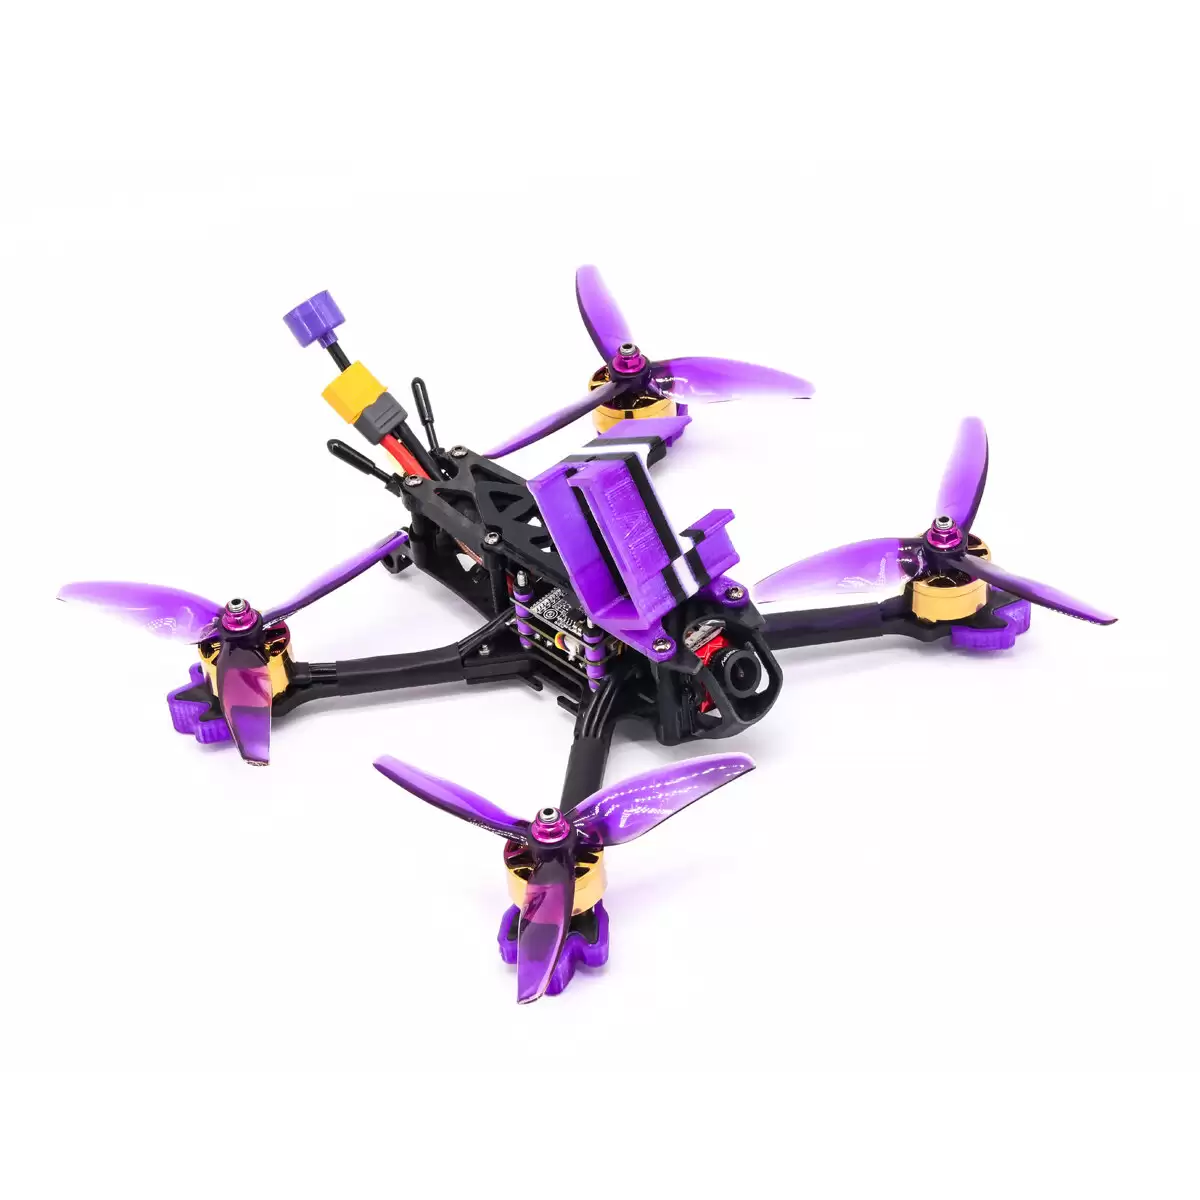 Order In Just $151.20 20% Off For Eachine Lal 5style 220mm 4s Freestyle 5 Inch Fpv Racing Drone Pnp/bnf F4 Bluetooth Fc Caddx Ratel 2307 2450kv Motor 50a Blheli_32 Esc With This Coupon At Banggood